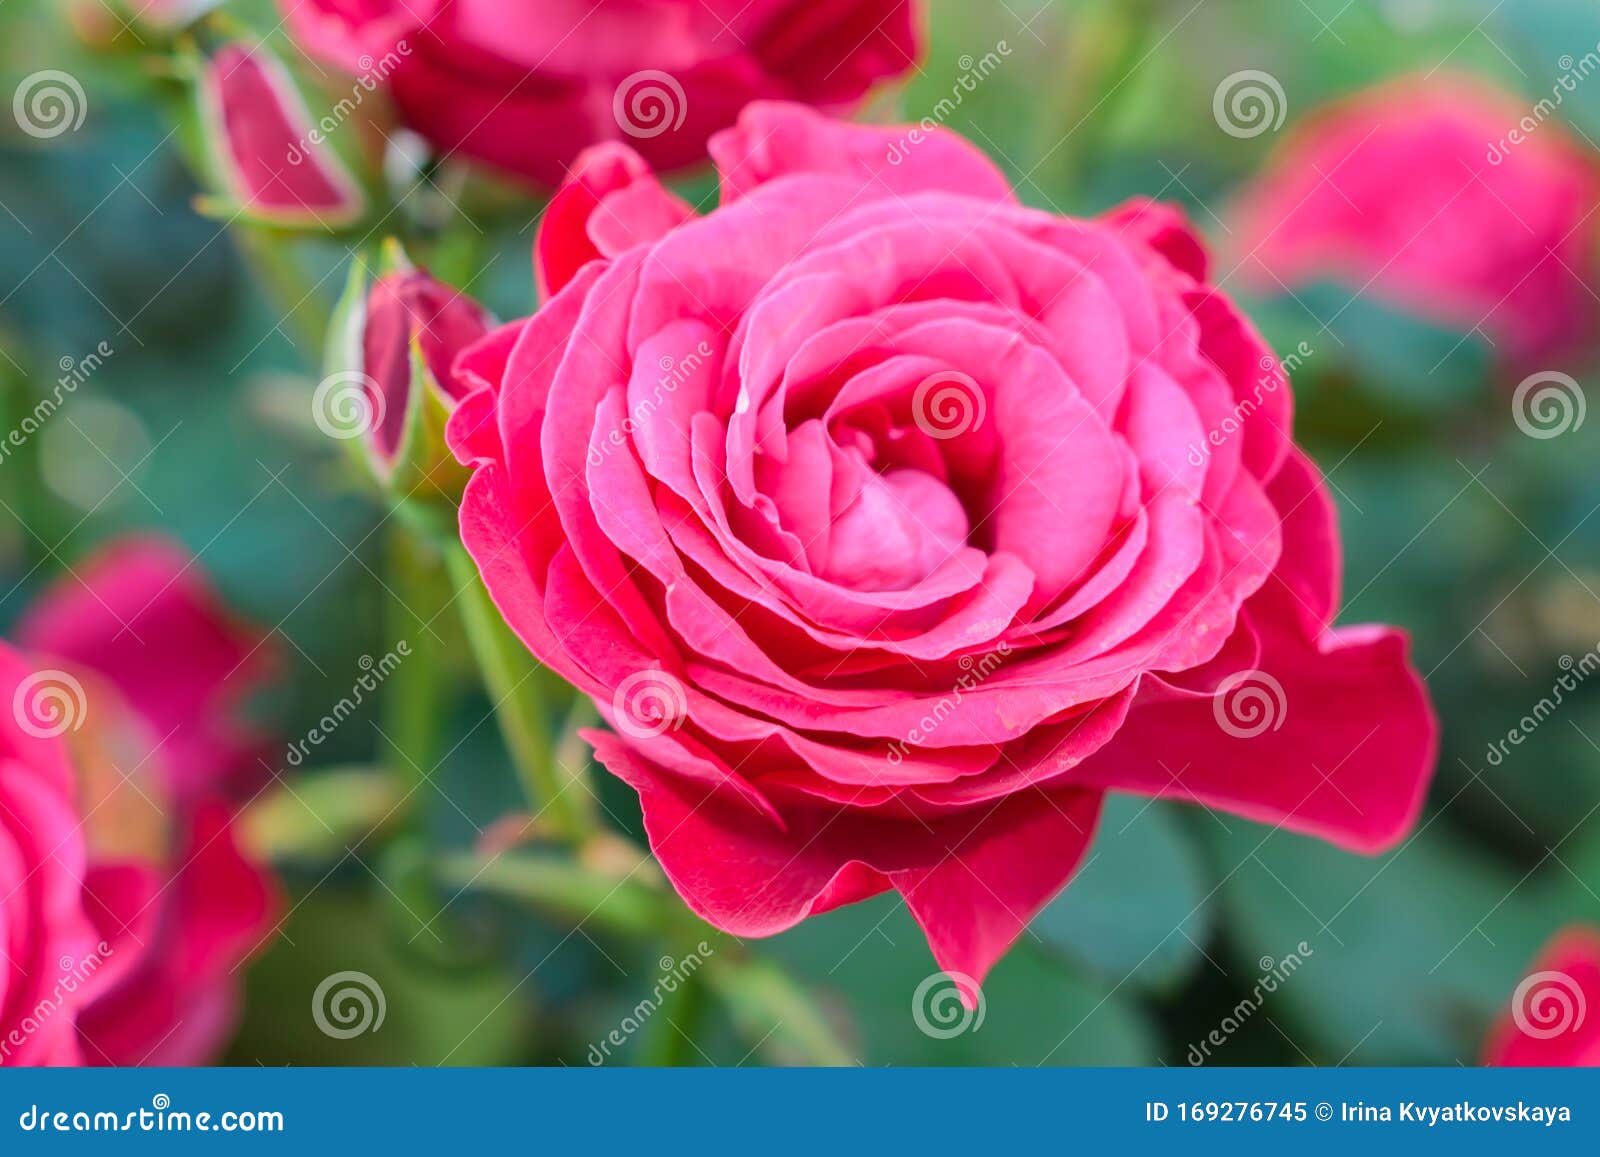 Beautiful Roses Garden. Close Up of Blooming Rose Flowers of Pink ...